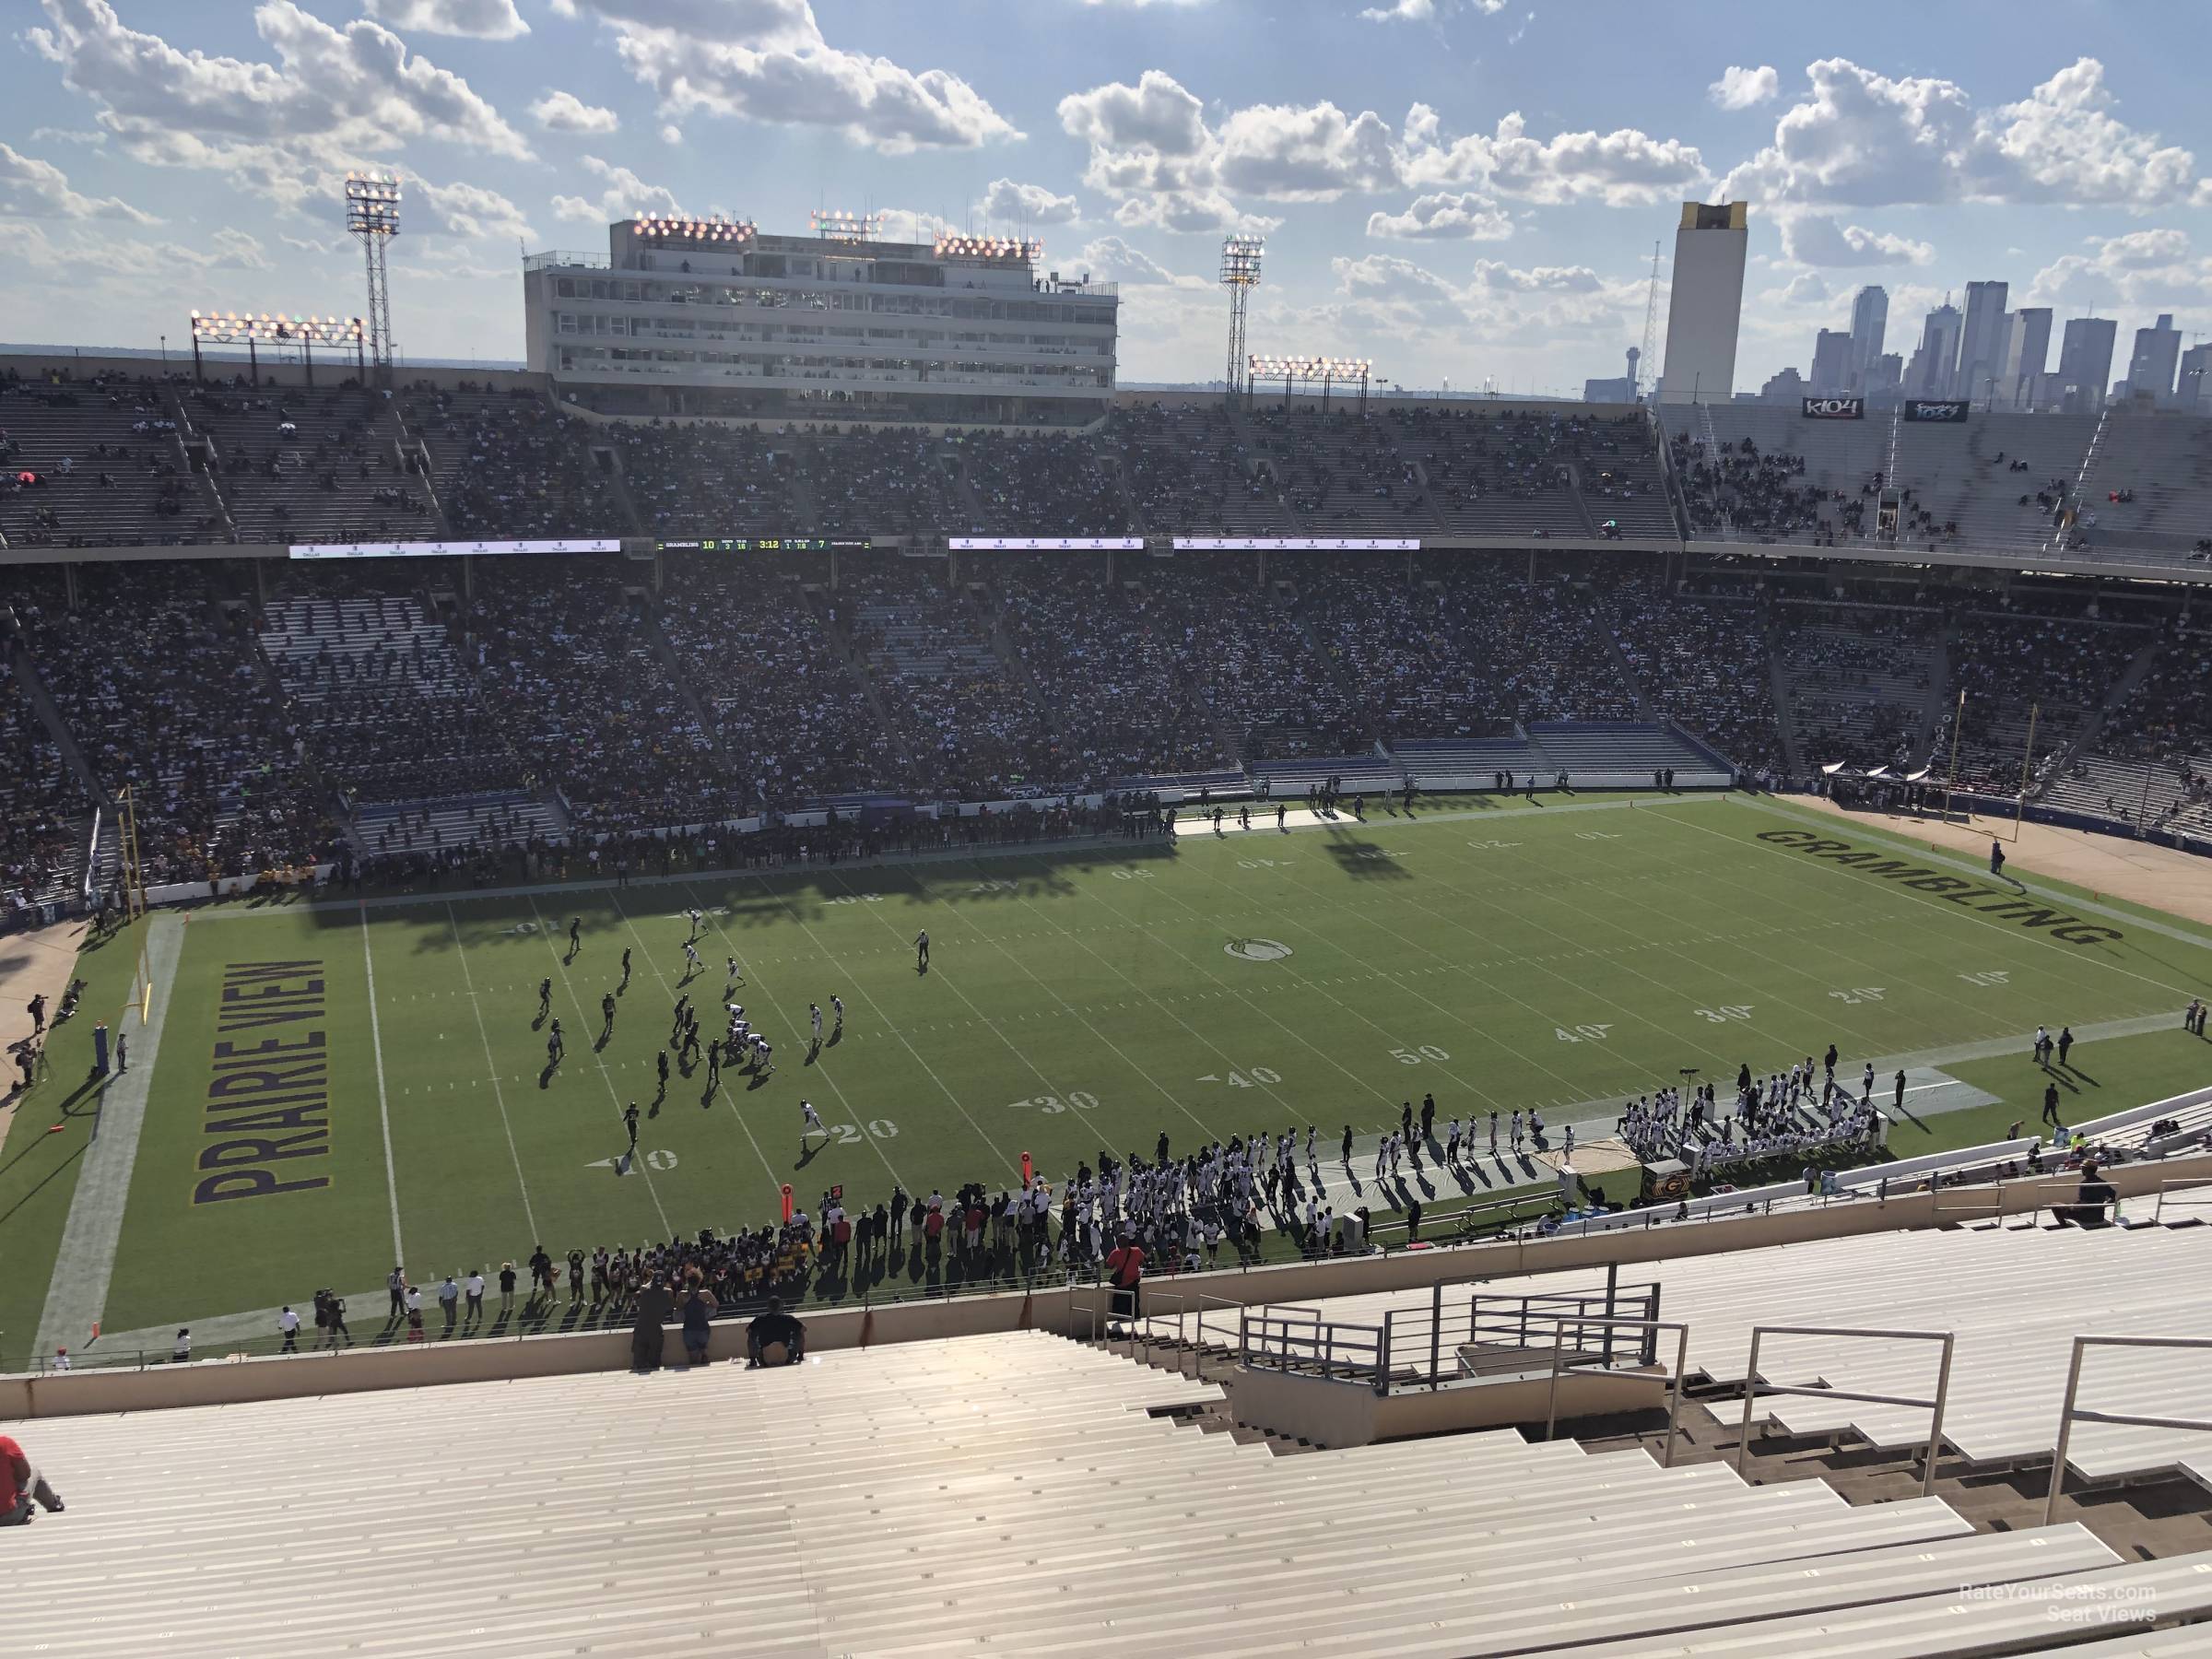 section 131, row 36 seat view  - cotton bowl